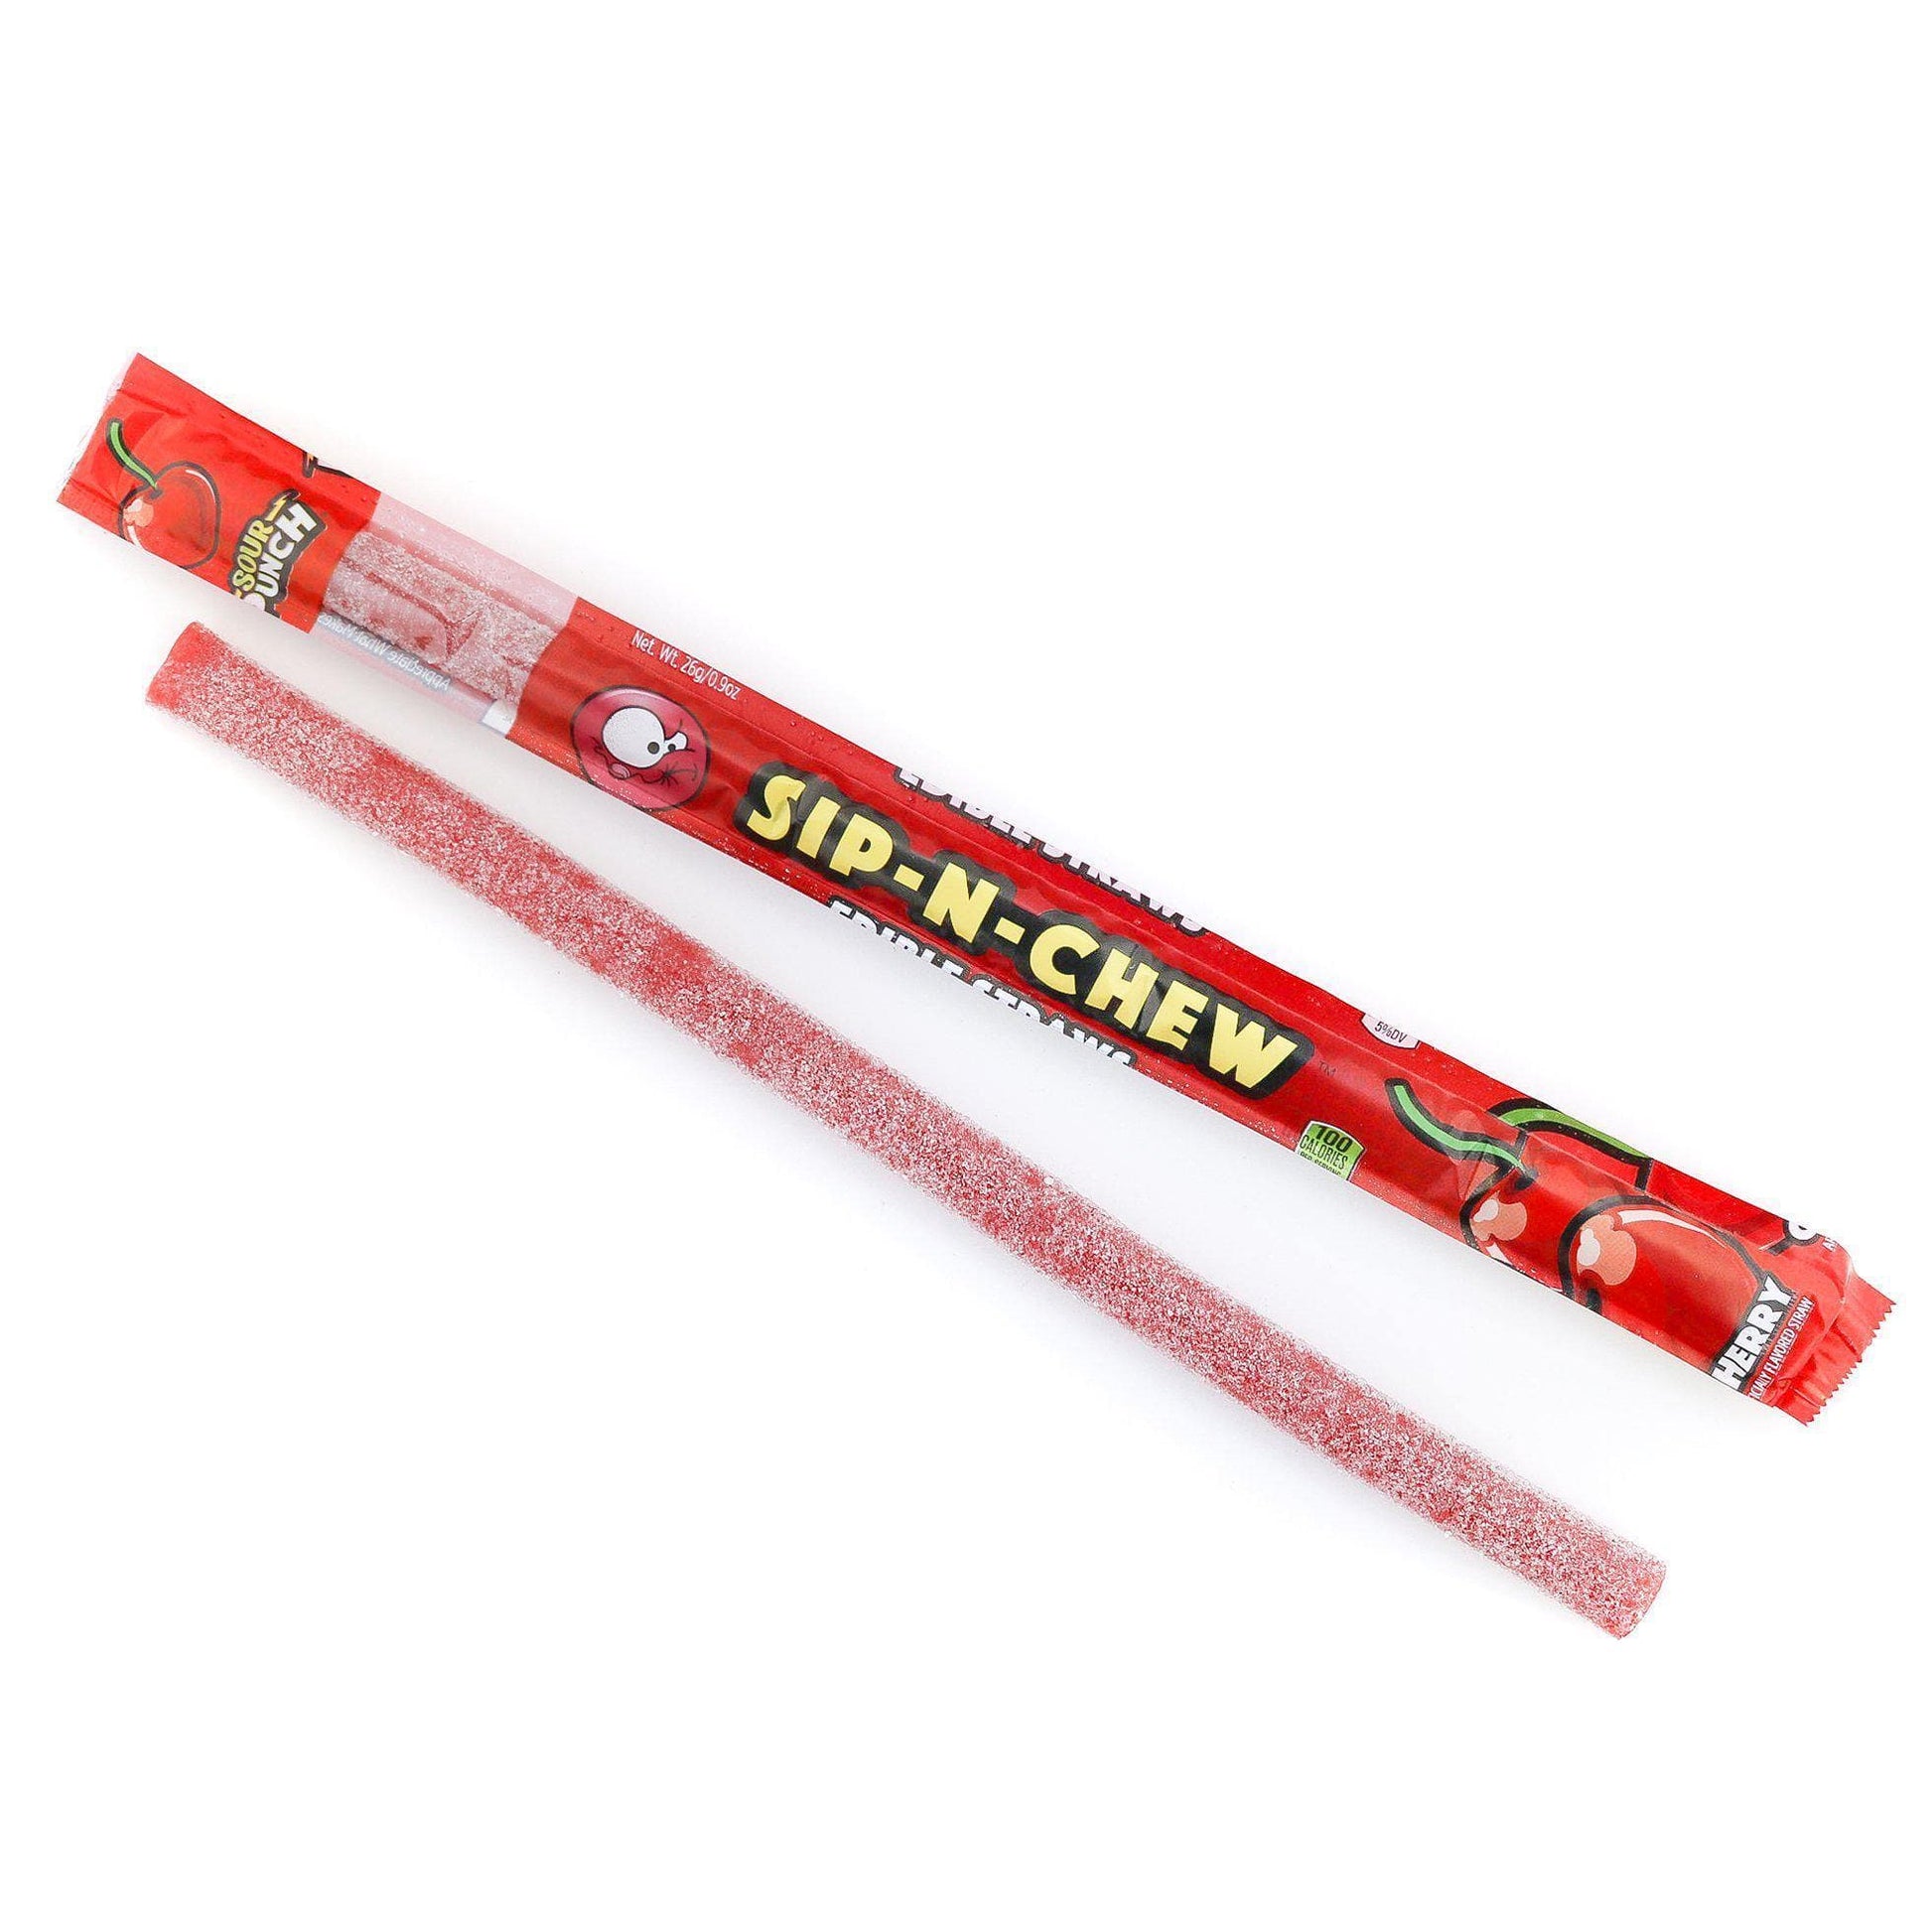 Sour Punch Candy - American Licorice Company